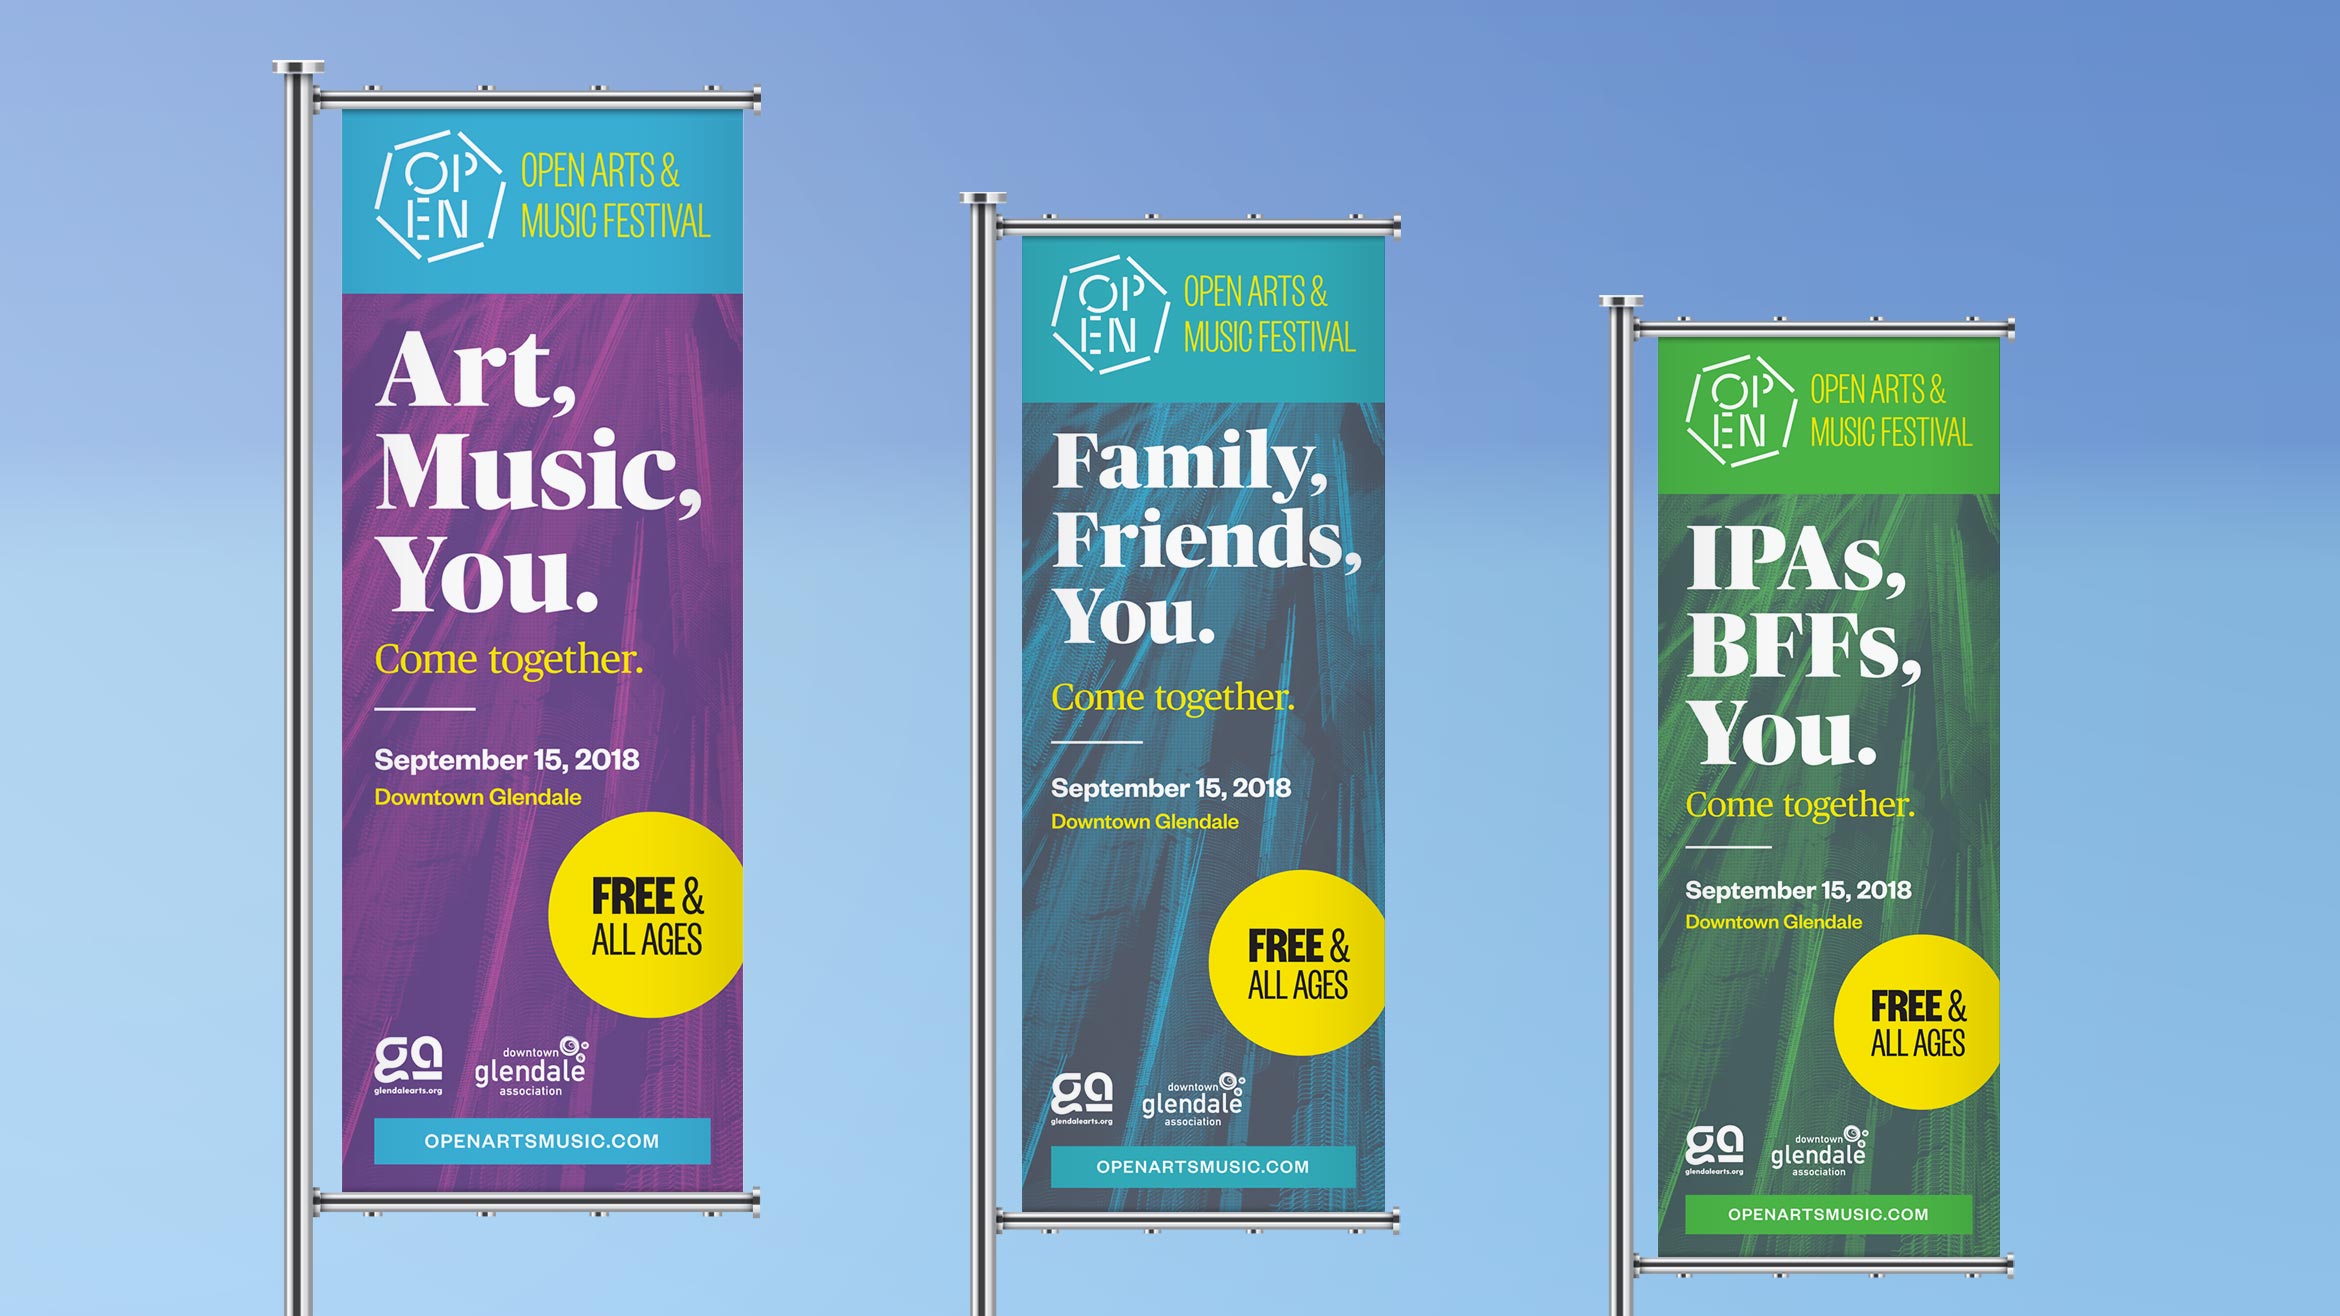 Open Arts & Music Festival Street Banners designed by Kilter